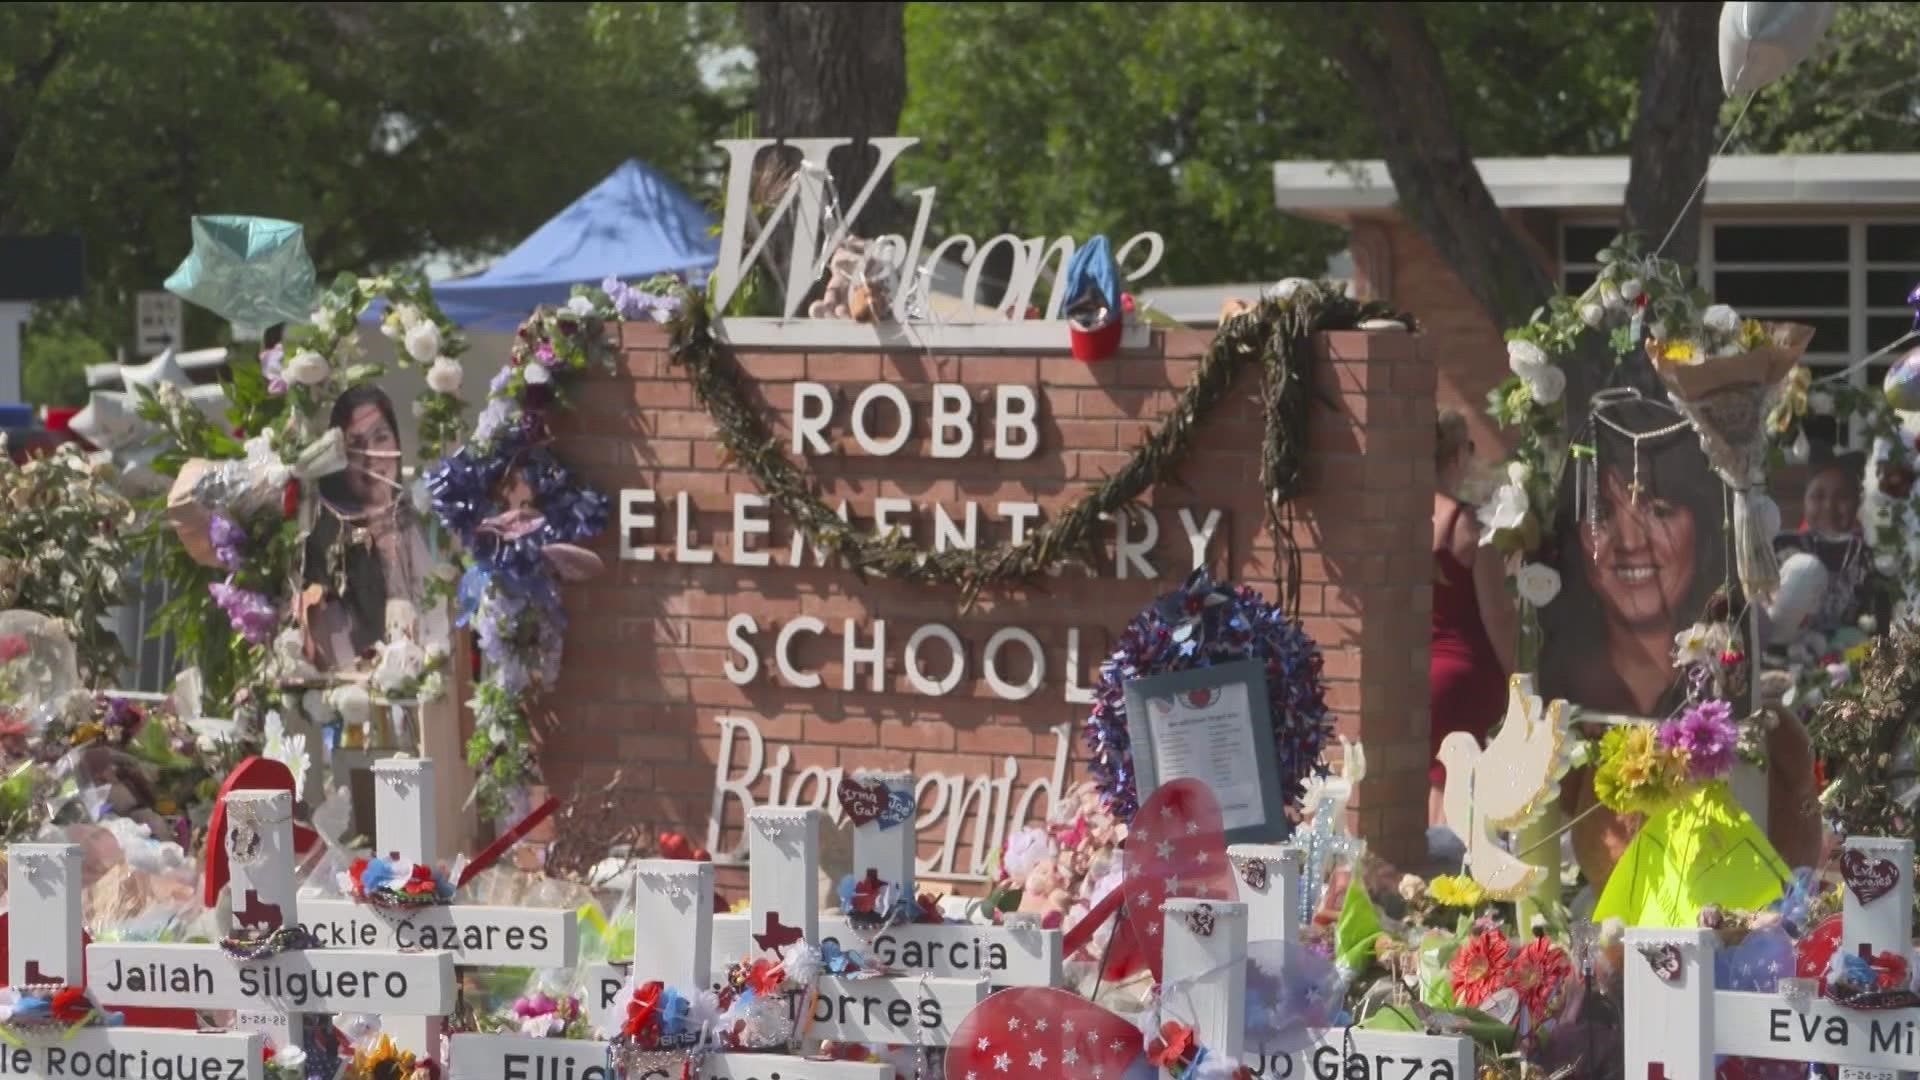 The Texas House committee investigating the Uvalde school shooting could release surveillance footage from the hallways of Robb Elementary during its hearing.